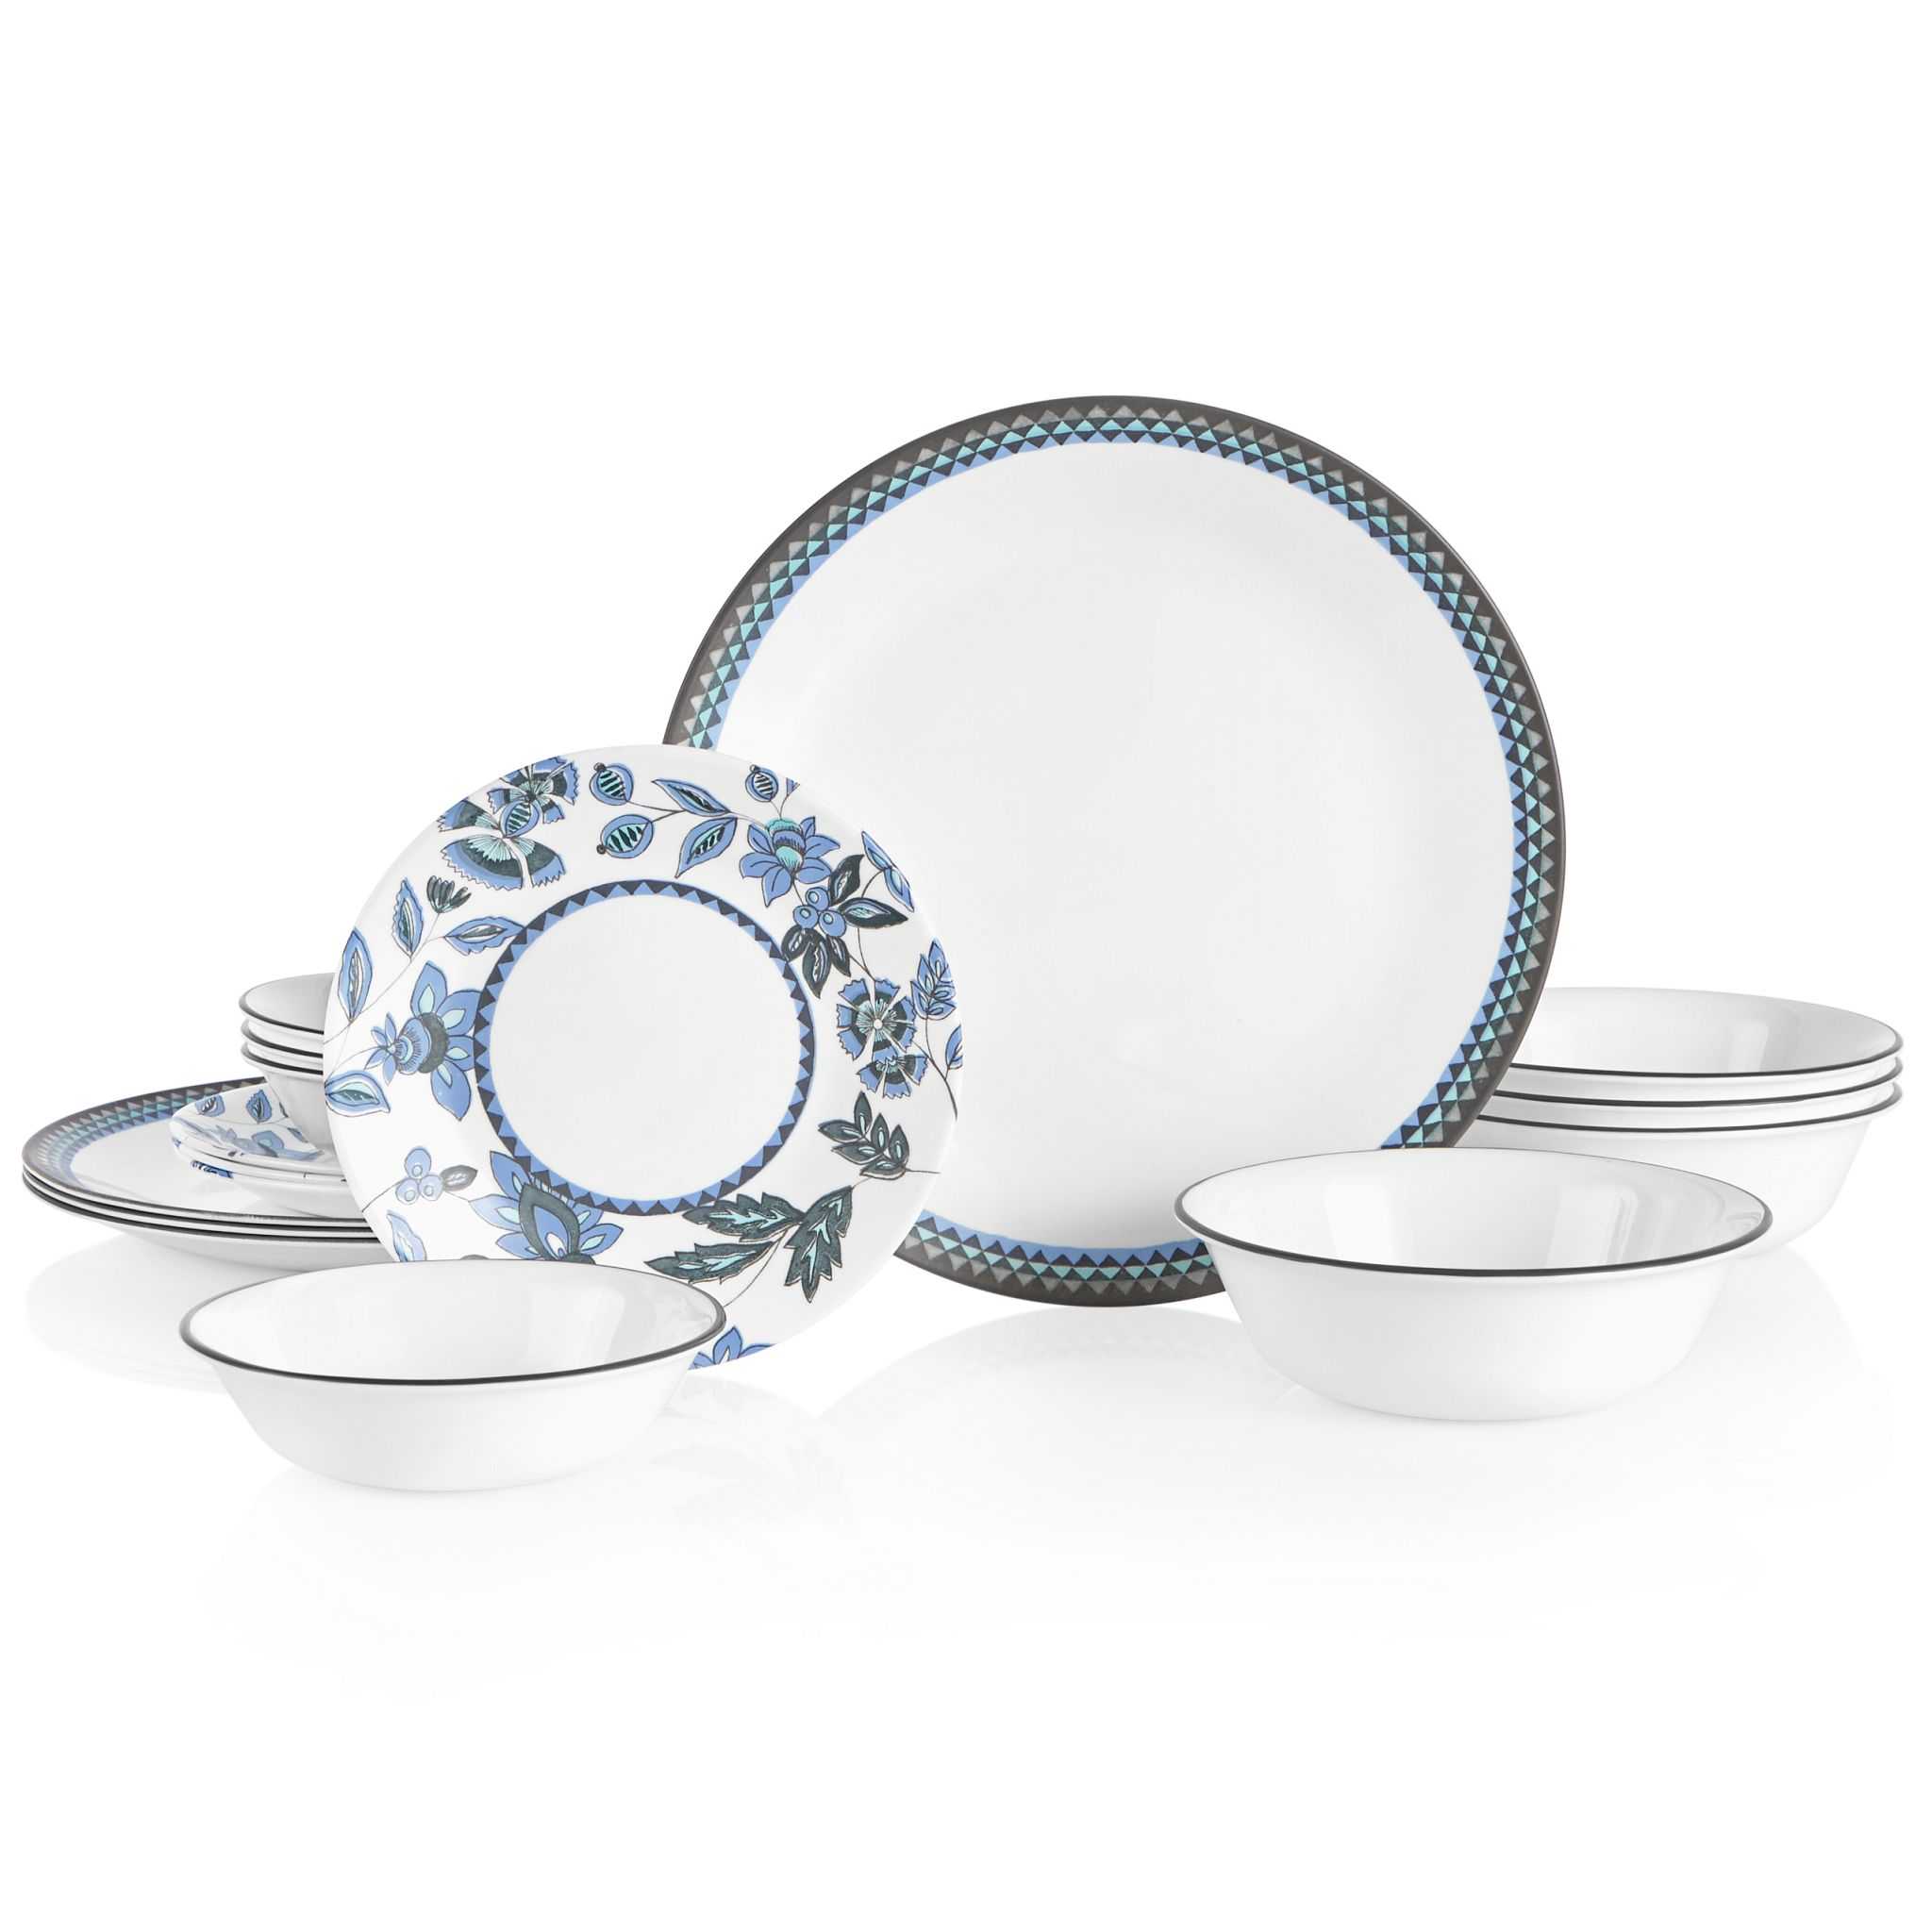 Best Dinnerware Sets That Combine Quality and Style